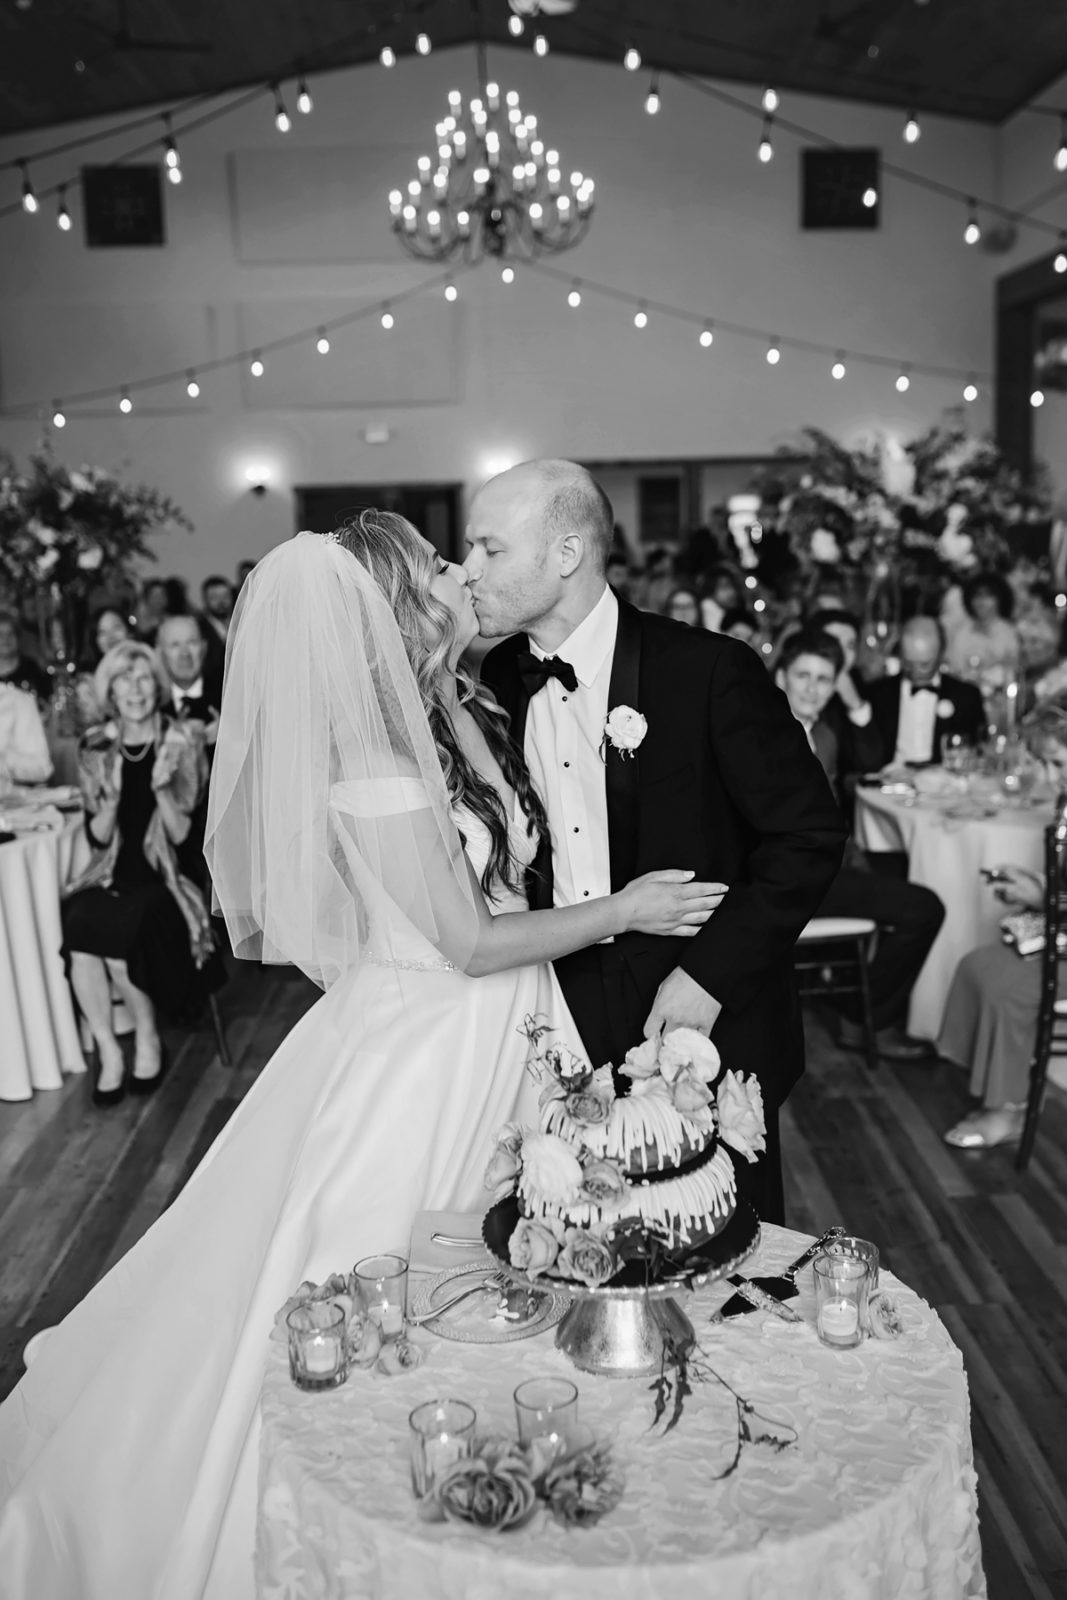 Black and white image of bride and groom kissing while cutting wedding cake.